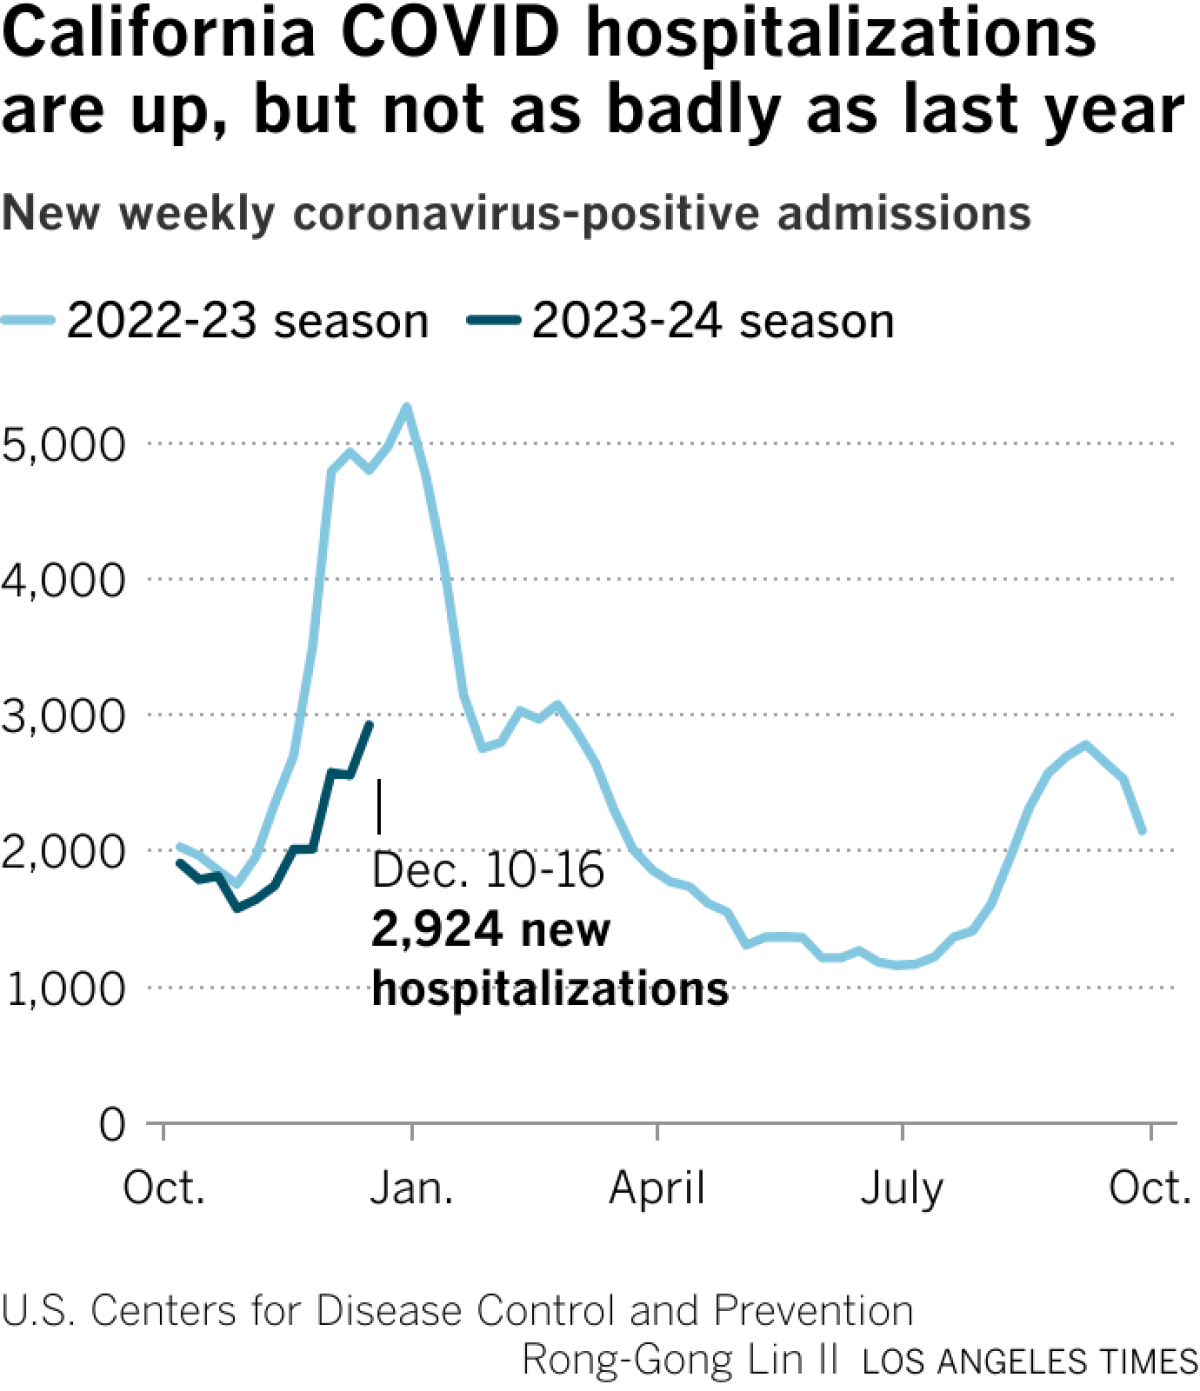 The line graph compares the hospitalization rate due to COVID-19 in the 2023-24 season with the previous one.  The number of new hospitalizations for the week ending December 9 was 2,449.